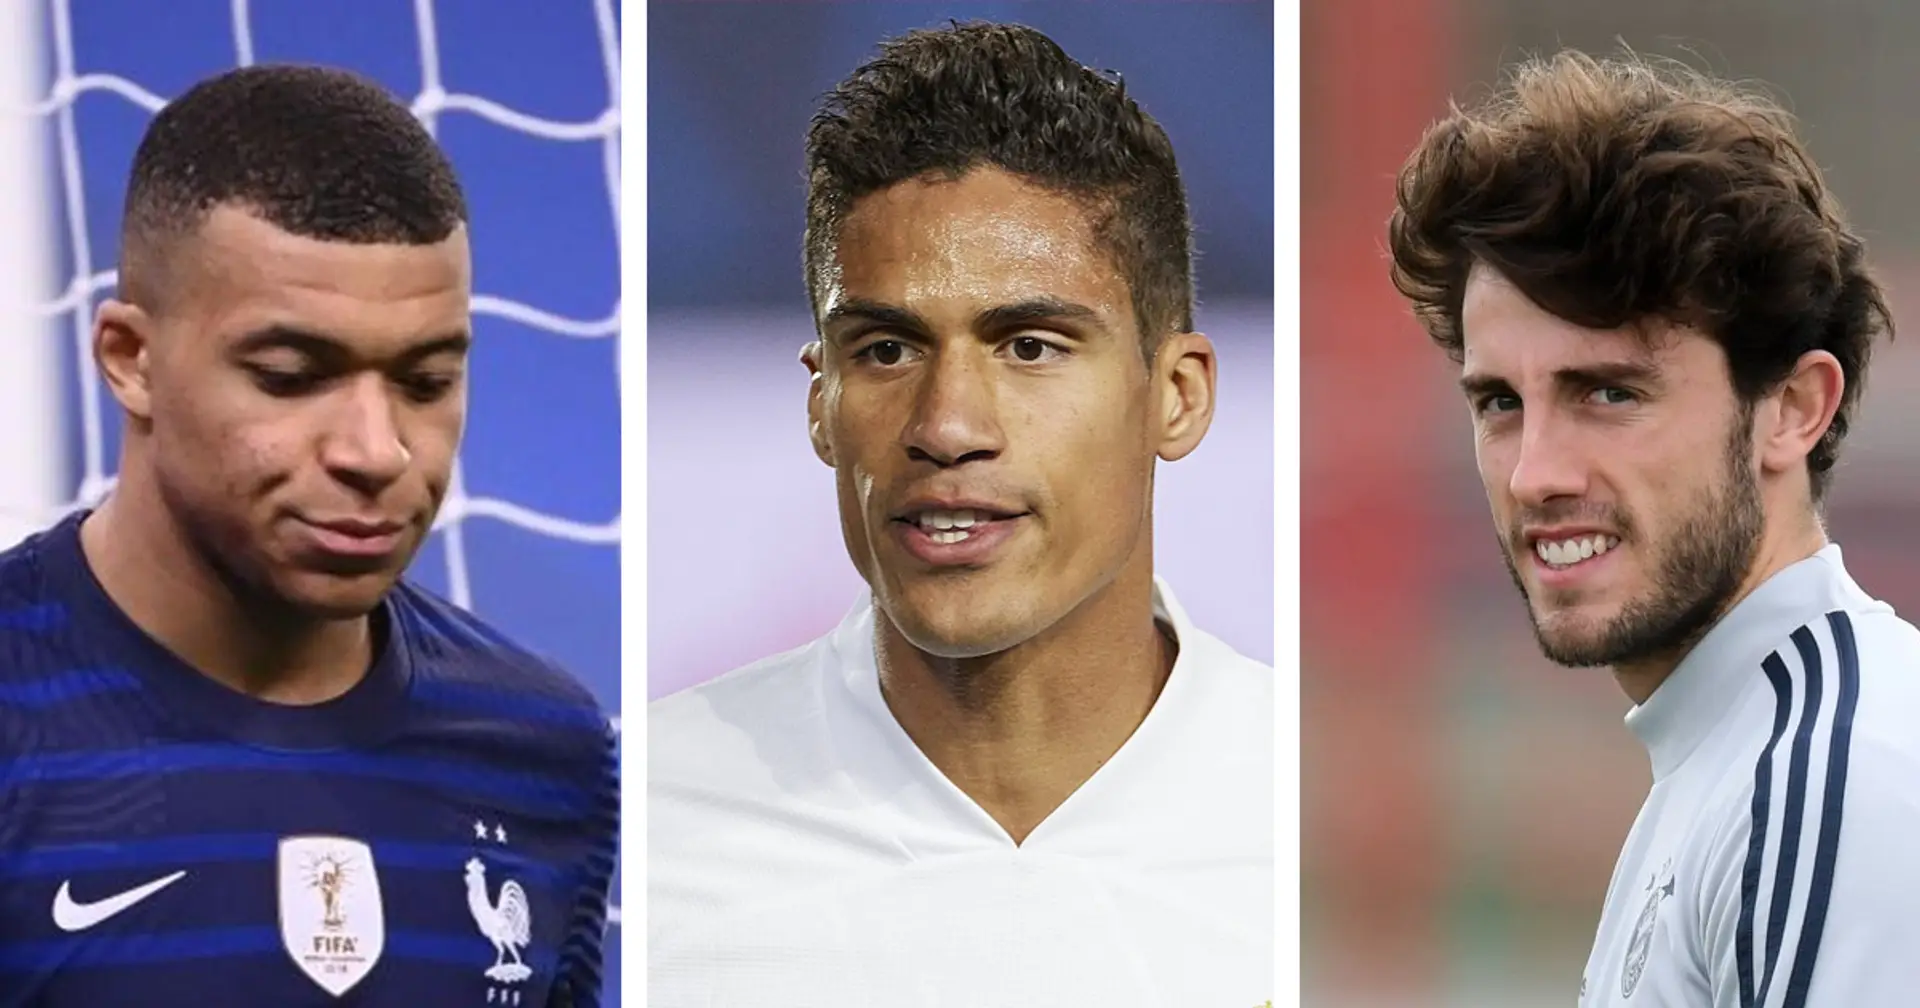 2 players likeliest to join, 3 to leave & more: Madrid's INs and OUTs sorted from most plausible to unlikely